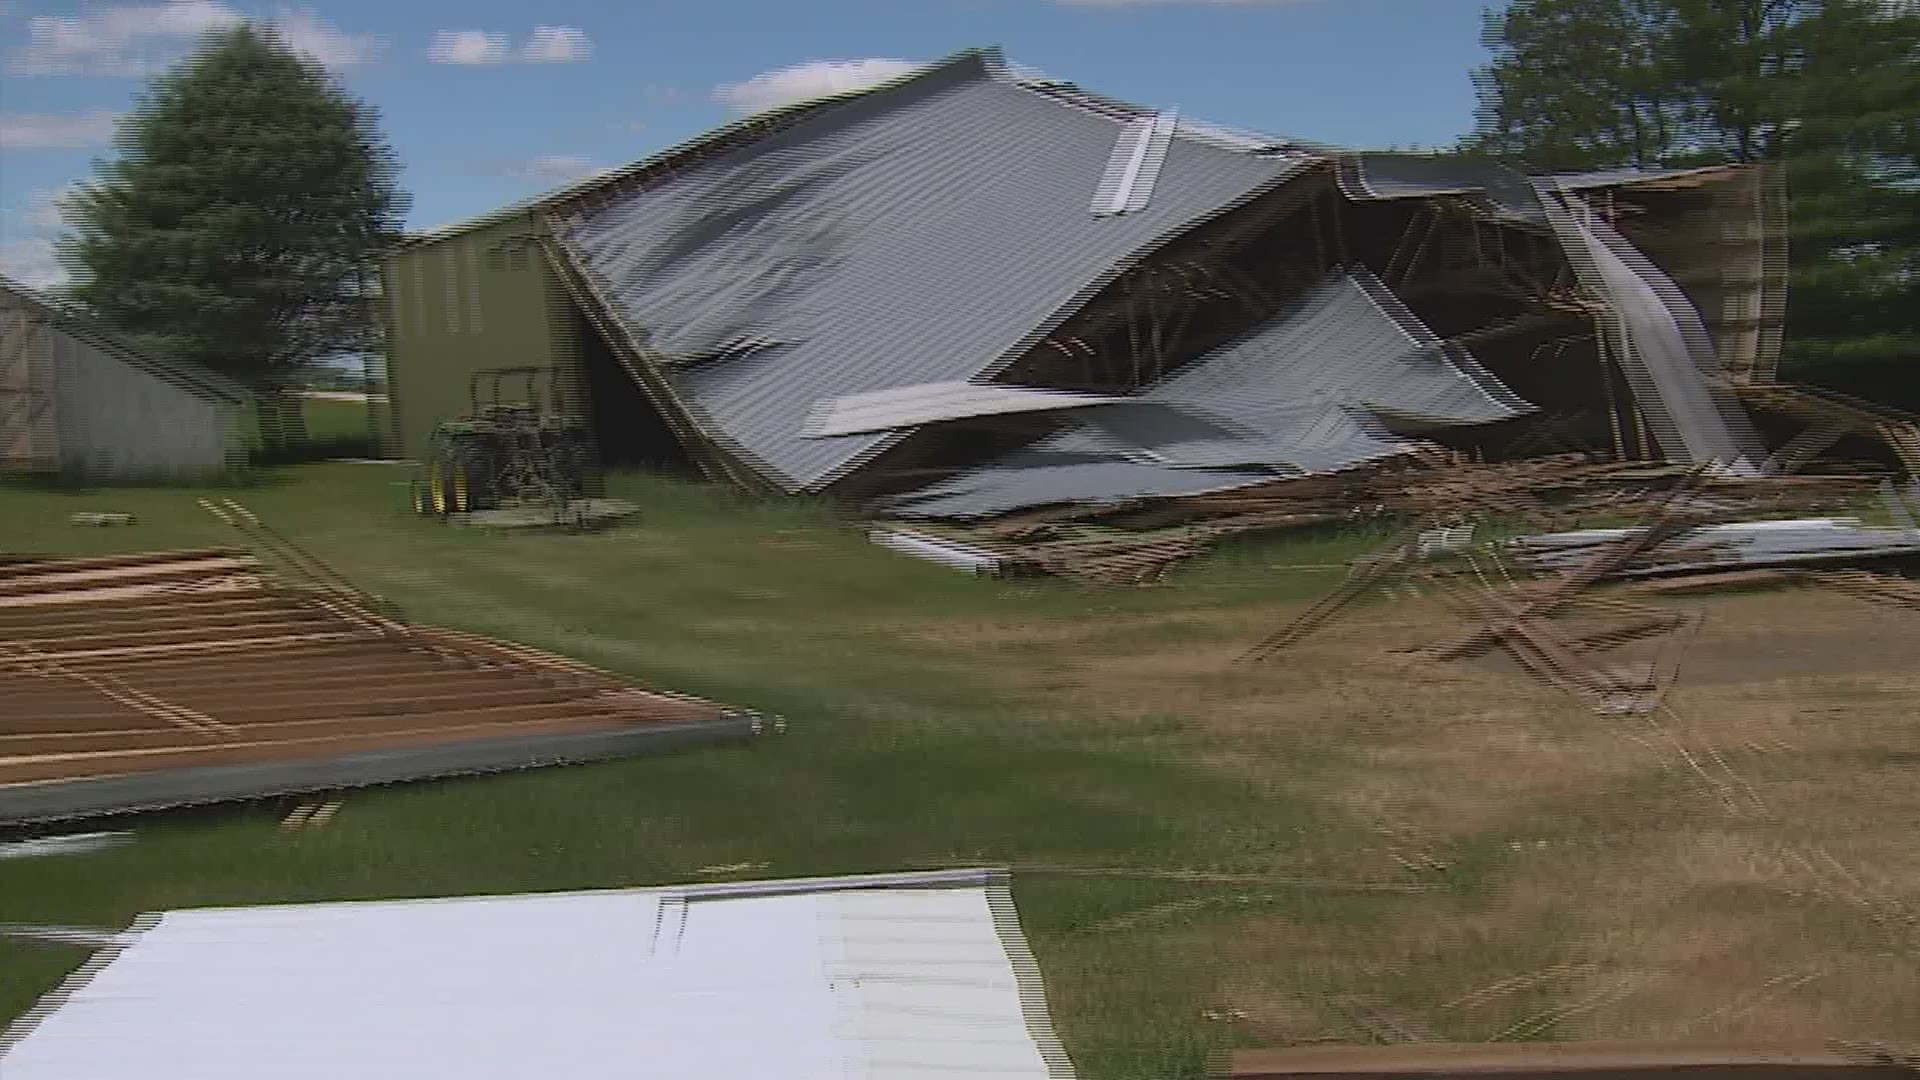 Winds up to 100 miles per hour struck rural Jackson County Sunday evening.